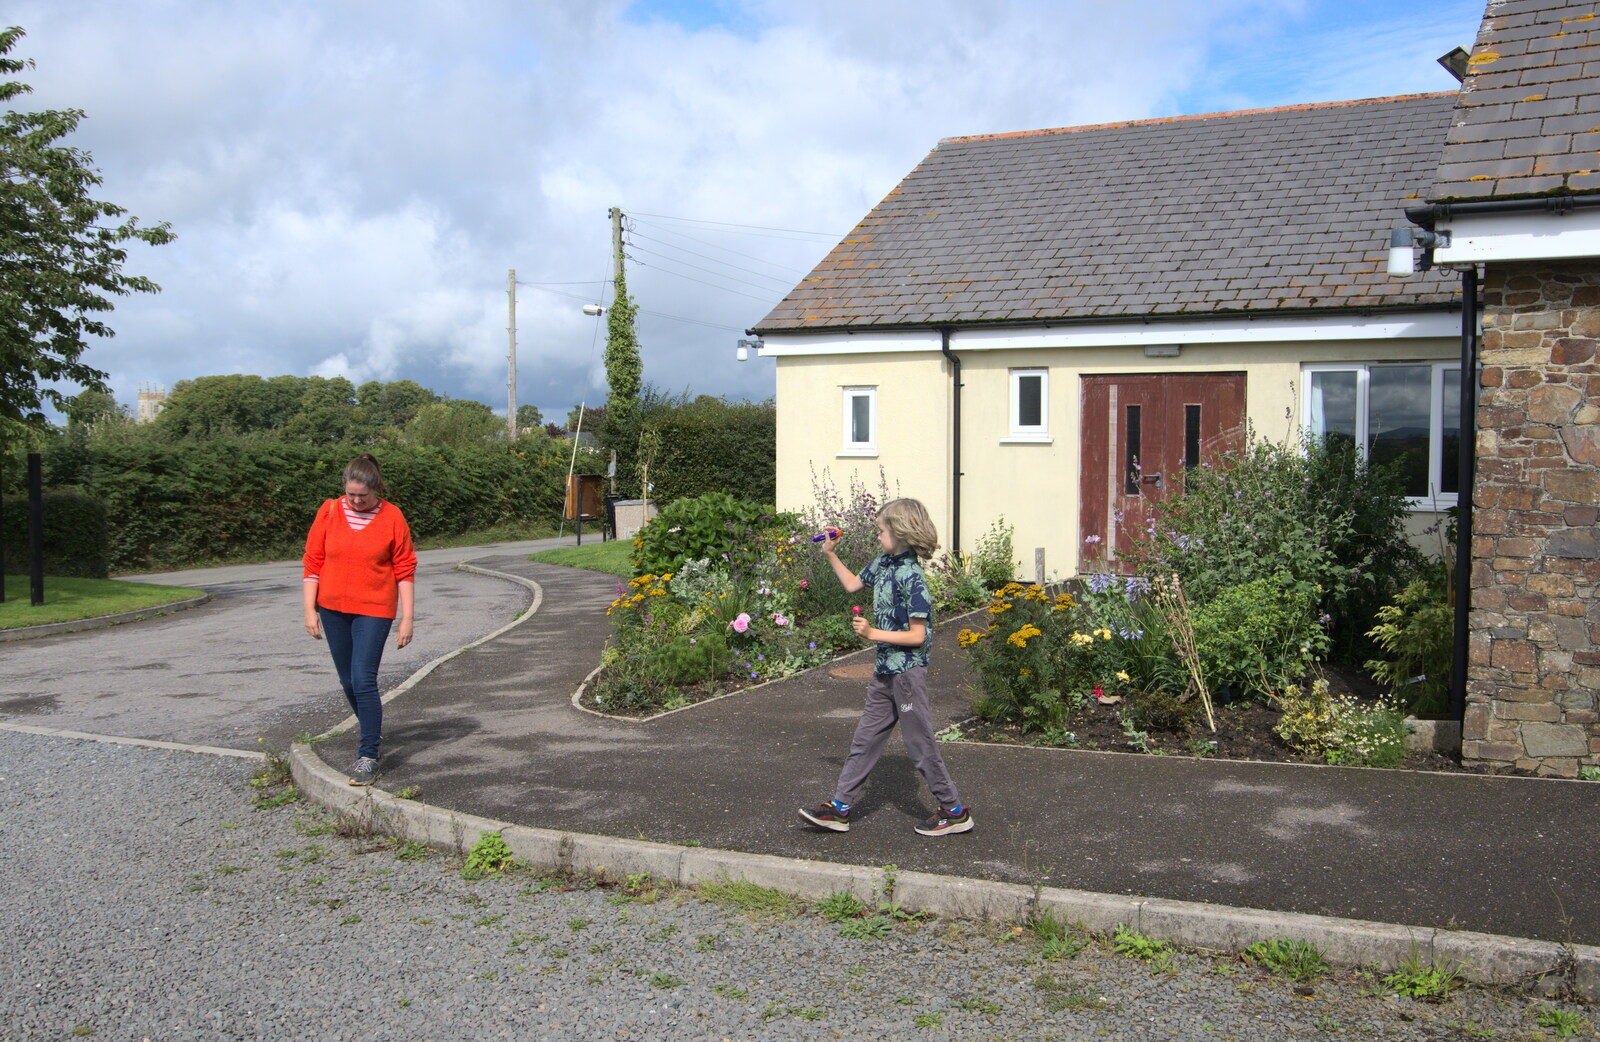 Isobel wanders past the village hall from A Game of Cricket, and a Walk Around Chagford, Devon - 23rd August 2020